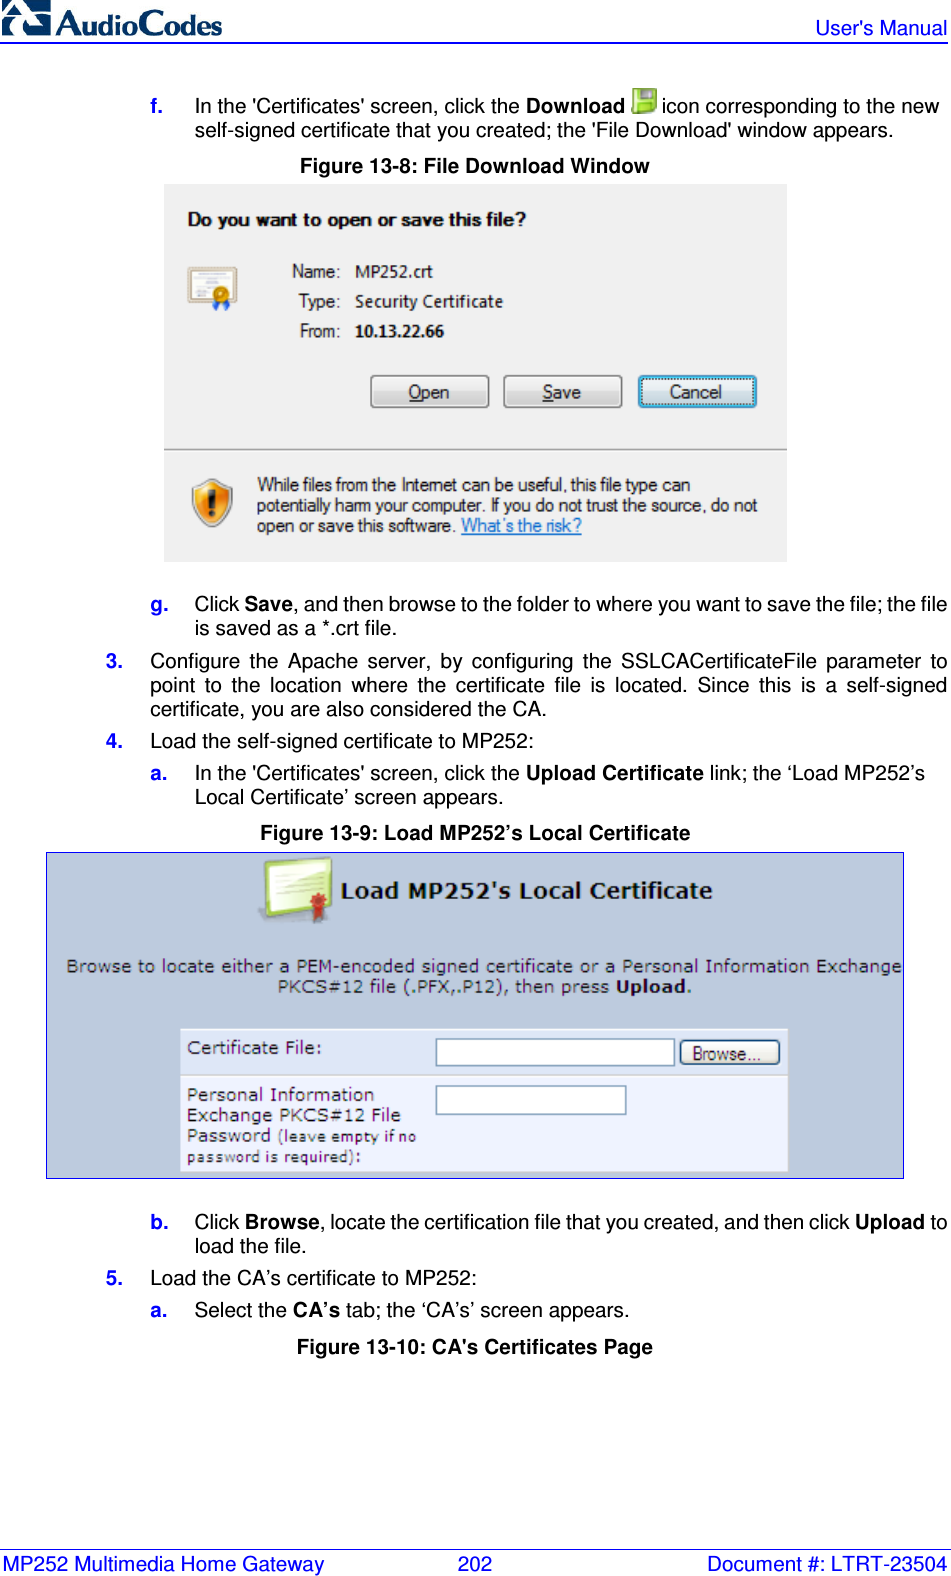 MP252 Multimedia Home Gateway  202  Document #: LTRT-23504   User&apos;s Manual  f.  In the &apos;Certificates&apos; screen, click the Download   icon corresponding to the new self-signed certificate that you created; the &apos;File Download&apos; window appears. Figure 13-8: File Download Window  g.  Click Save, and then browse to the folder to where you want to save the file; the file is saved as a *.crt file. 3.  Configure  the  Apache  server,  by  configuring  the  SSLCACertificateFile  parameter  to point  to  the  location  where  the  certificate  file  is  located.  Since  this  is  a  self-signed certificate, you are also considered the CA. 4.  Load the self-signed certificate to MP252: a.  In the &apos;Certificates&apos; screen, click the Upload Certificate link; the ‘Load MP252’s Local Certificate’ screen appears. Figure 13-9: Load MP252’s Local Certificate  b.  Click Browse, locate the certification file that you created, and then click Upload to load the file. 5.  Load the CA’s certificate to MP252: a.  Select the CA’s tab; the ‘CA’s’ screen appears. Figure 13-10: CA&apos;s Certificates Page 